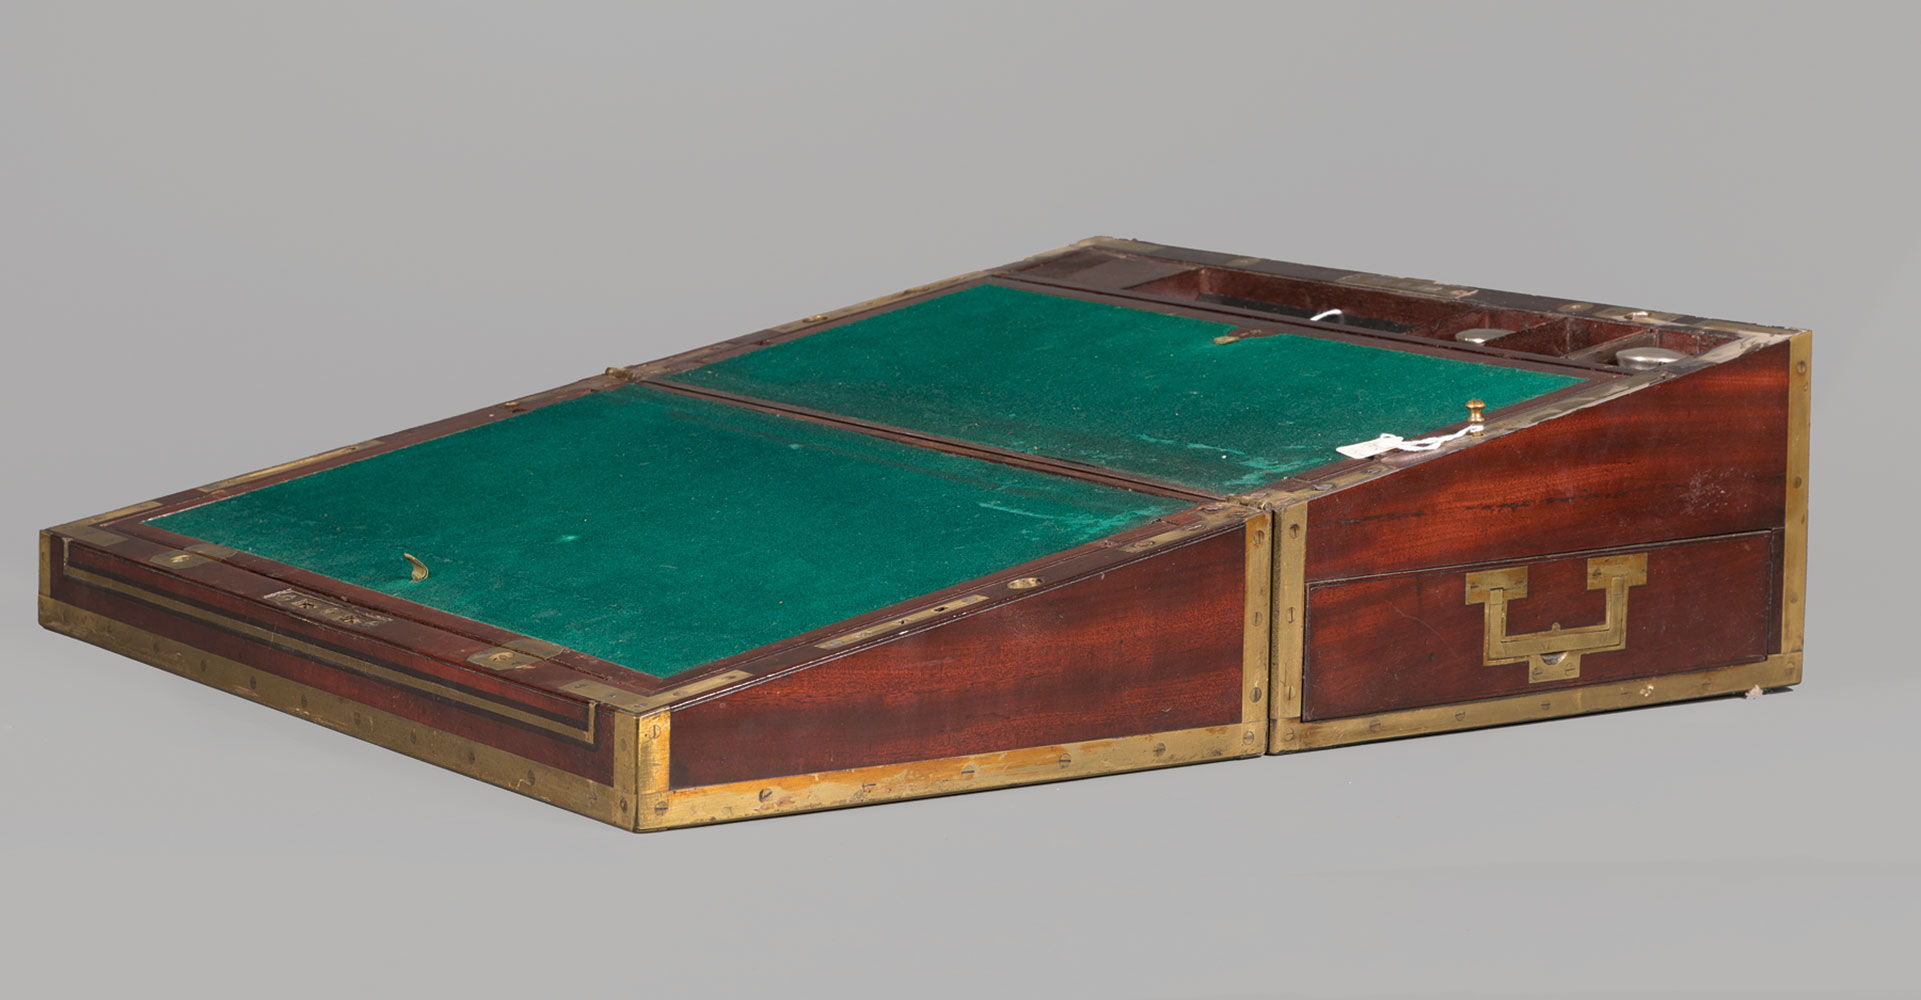 Regency Brass-Bound Mahogany Lap Desk , early 19th c., lid with decorative cartouche, fitted - Image 2 of 2